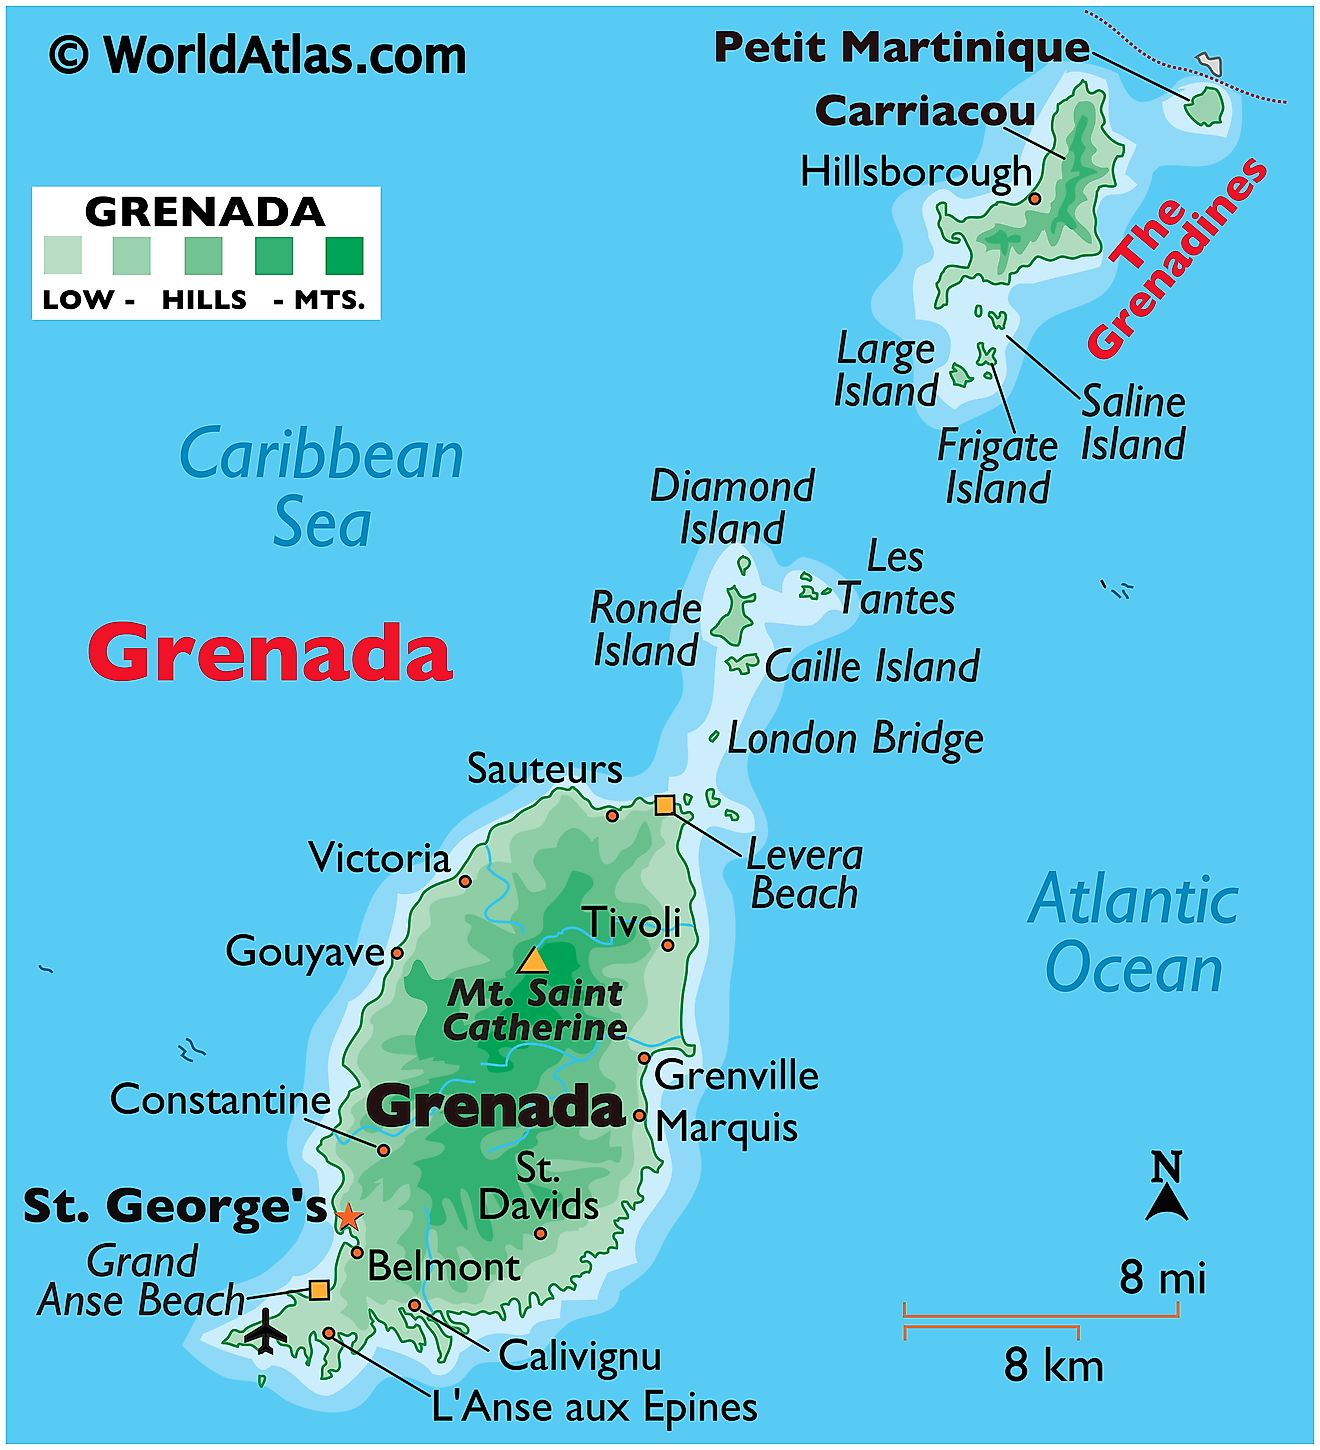 Physical Map of Grenada showing major islands, terrain, highest point, important settlements, beaches, etc.